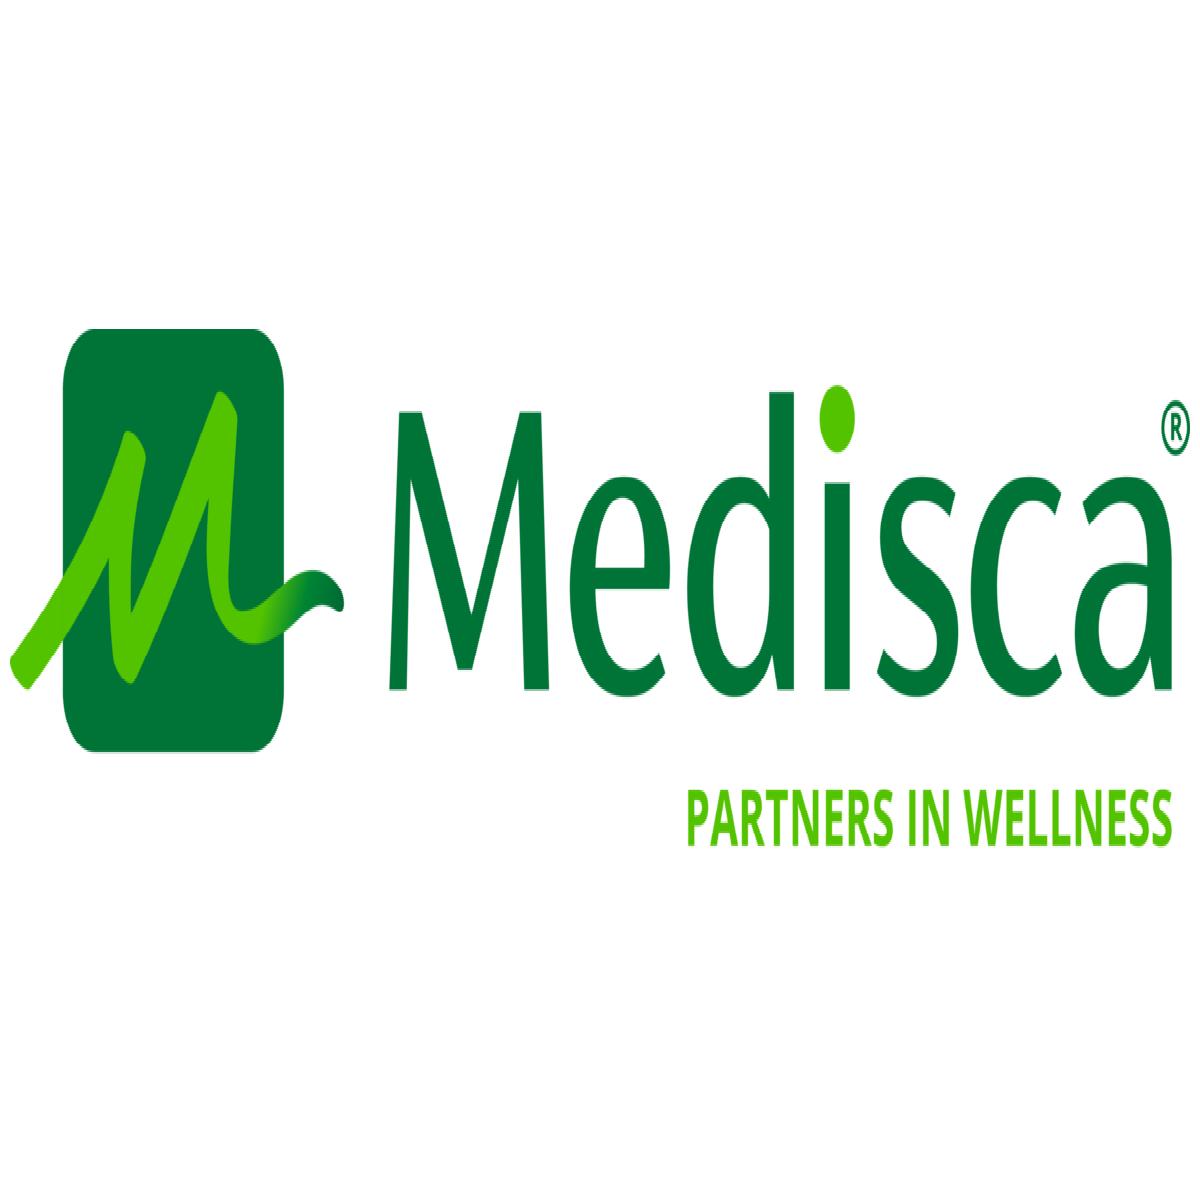 Medisca Unveils New Brand Identity and Corporate Positioning as Partners in Wellness